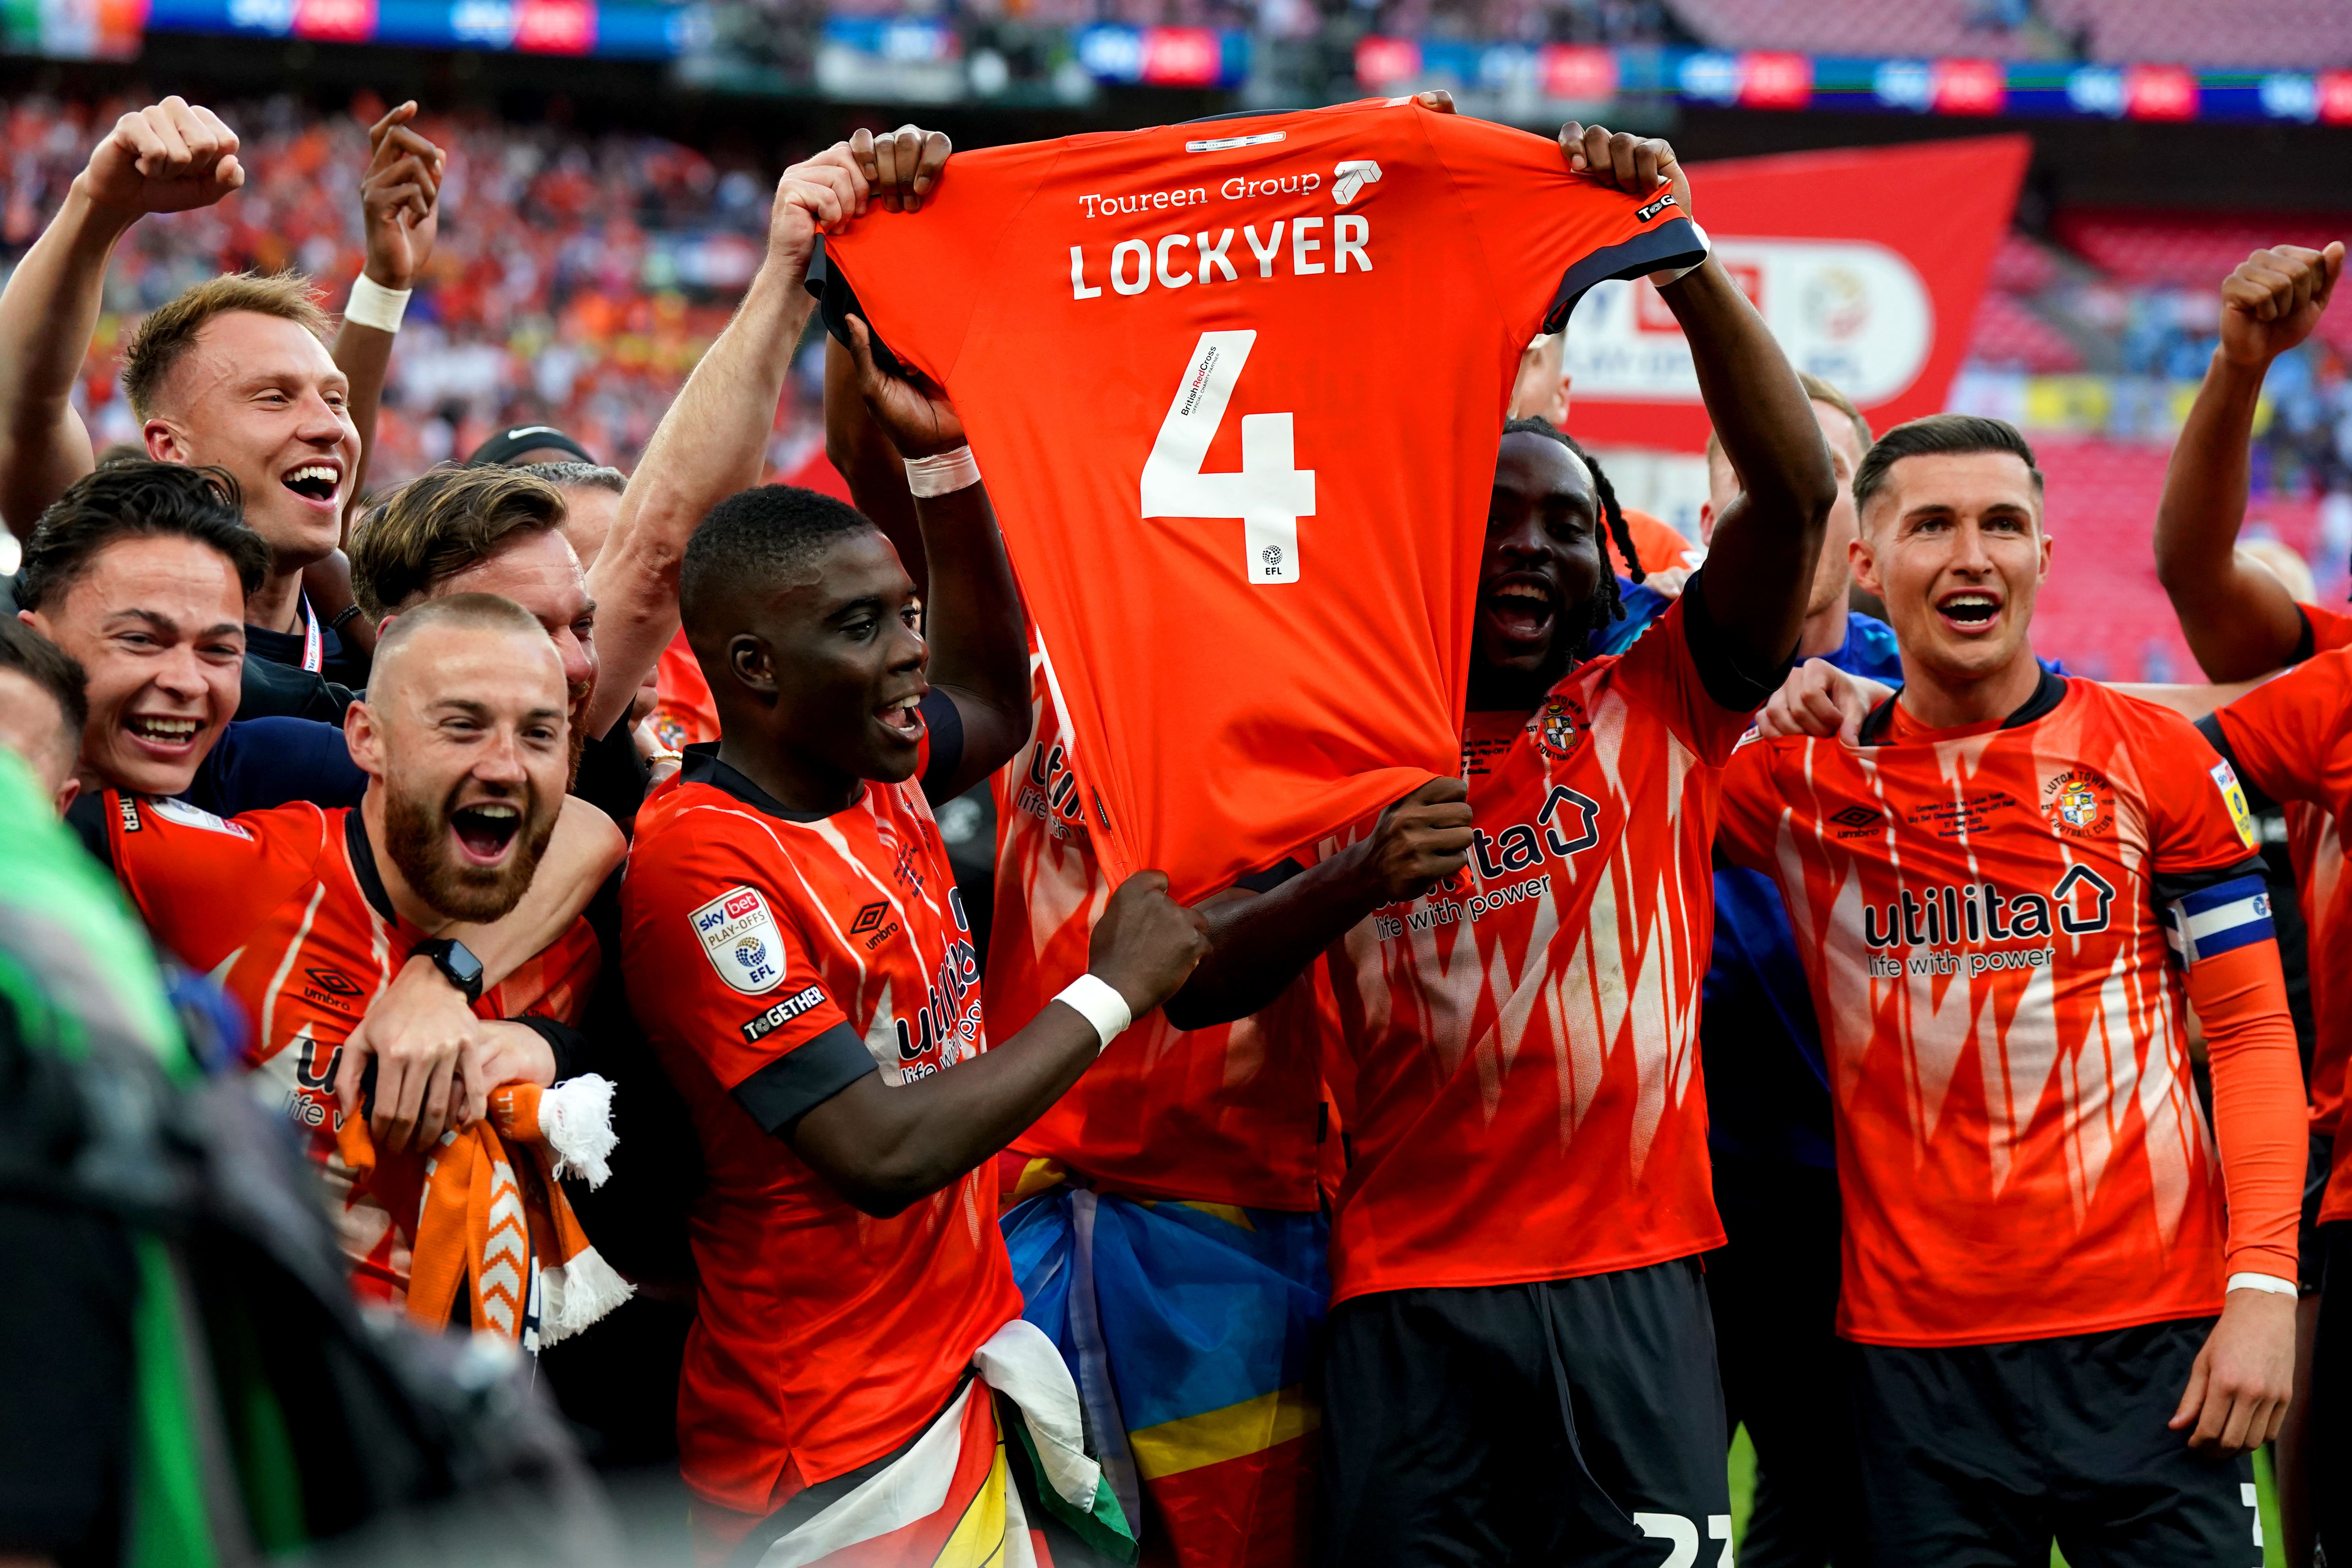 Luton players held up the shirt of team-mate Tom Lockyer as they celebrated (Nick Potts/PA)